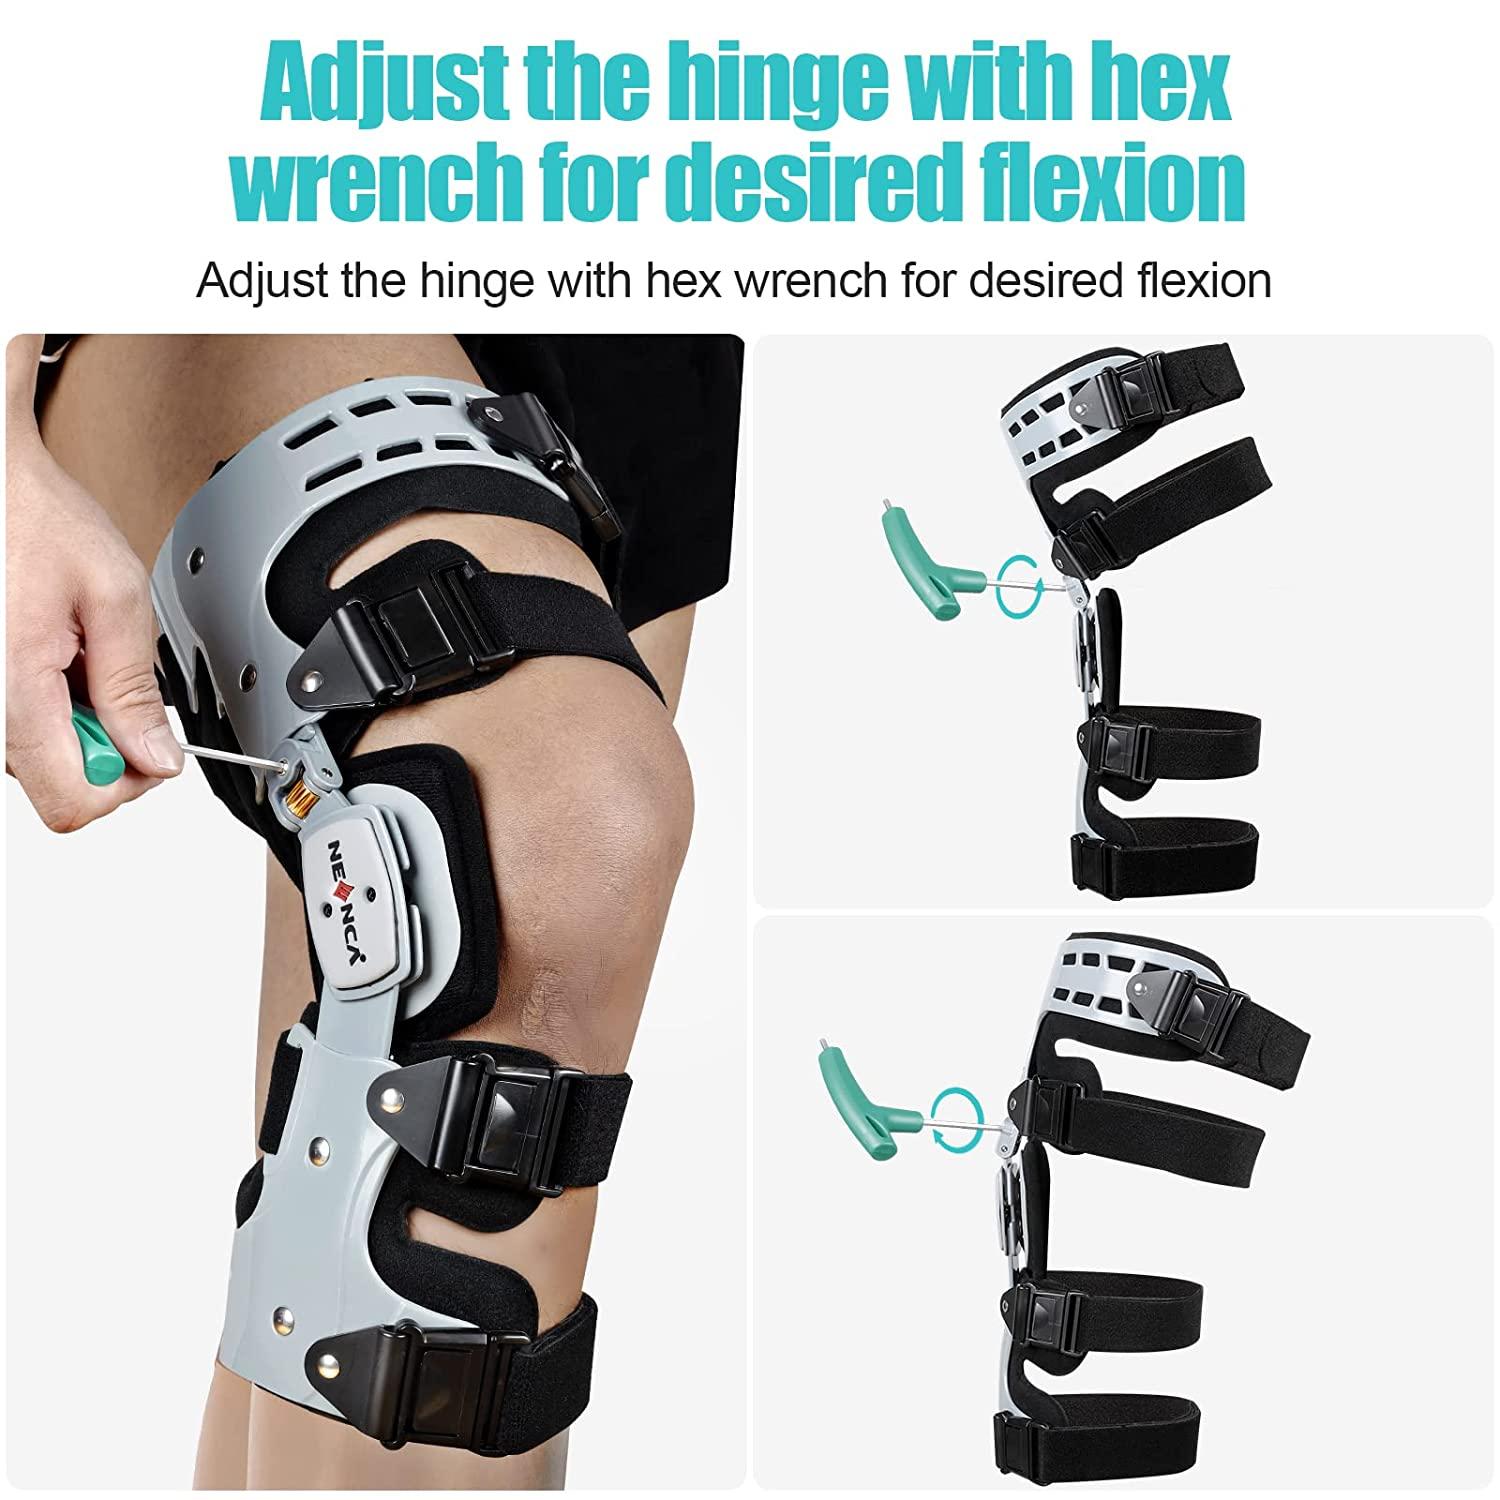 NEENCA Unloader ROM Knee Brace, Hinged Immobilizer for ACL, MCL